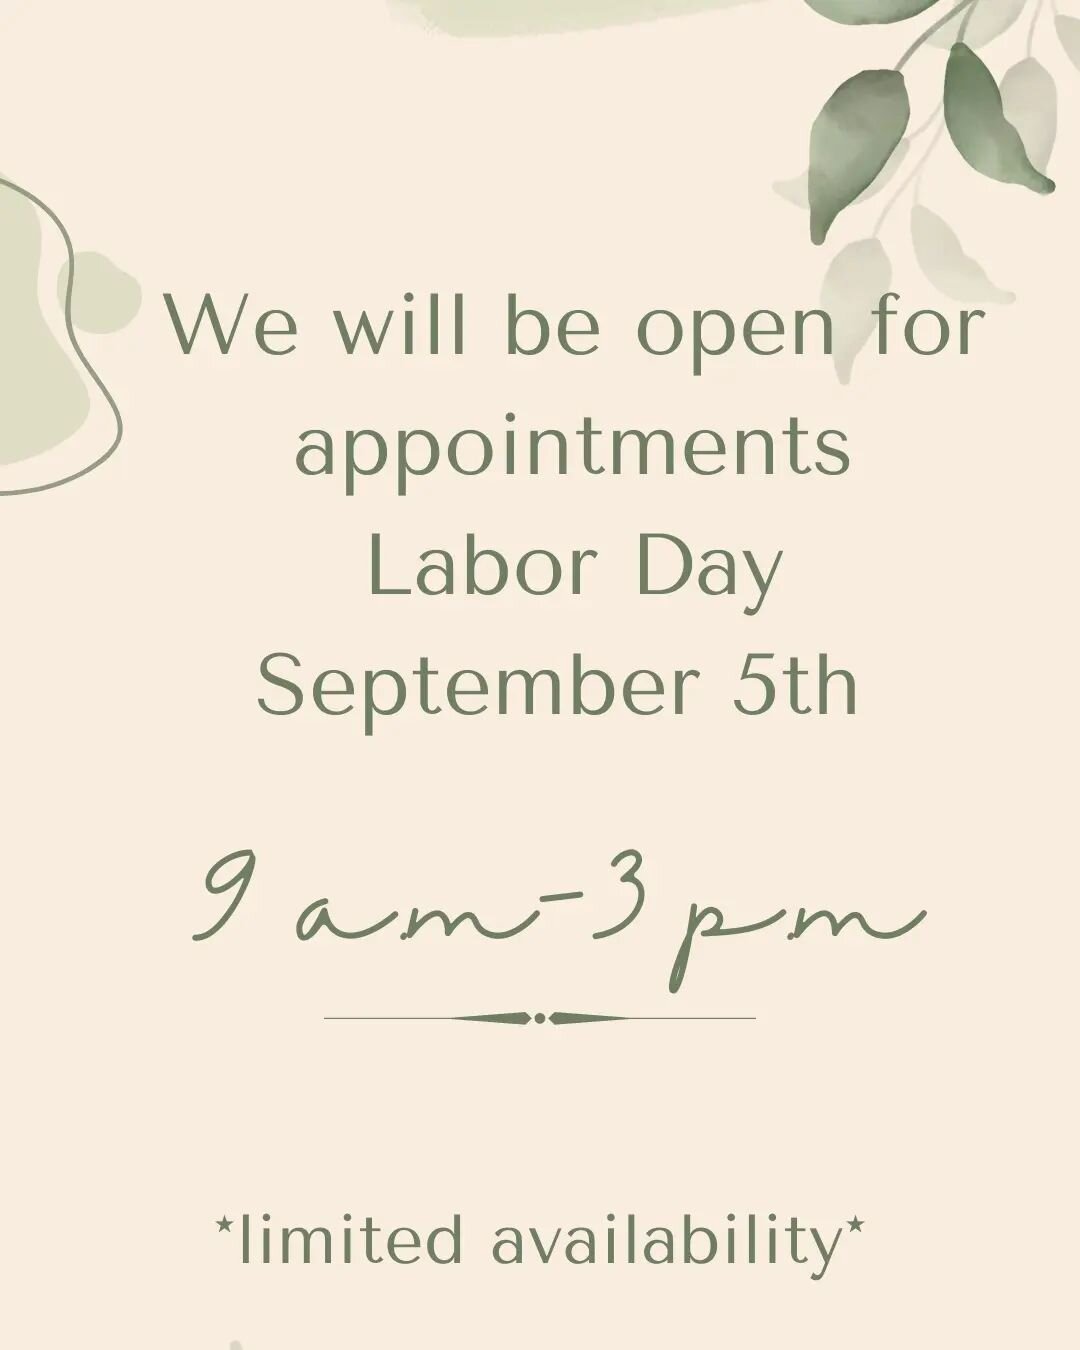 There are still a few appointments available!